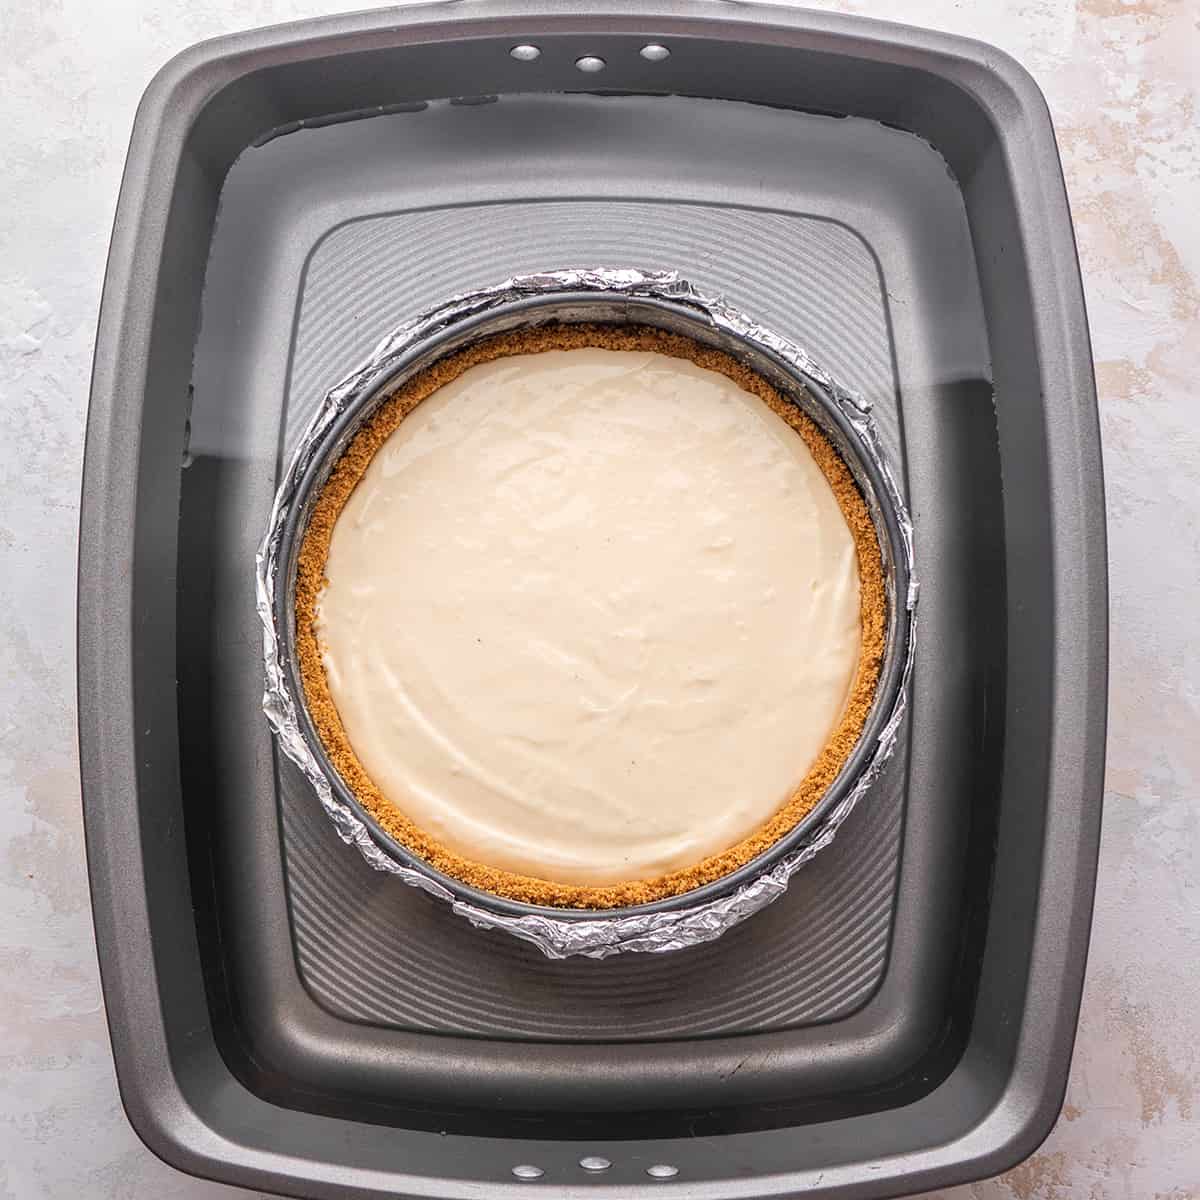 cheesecake in a water bath before baking